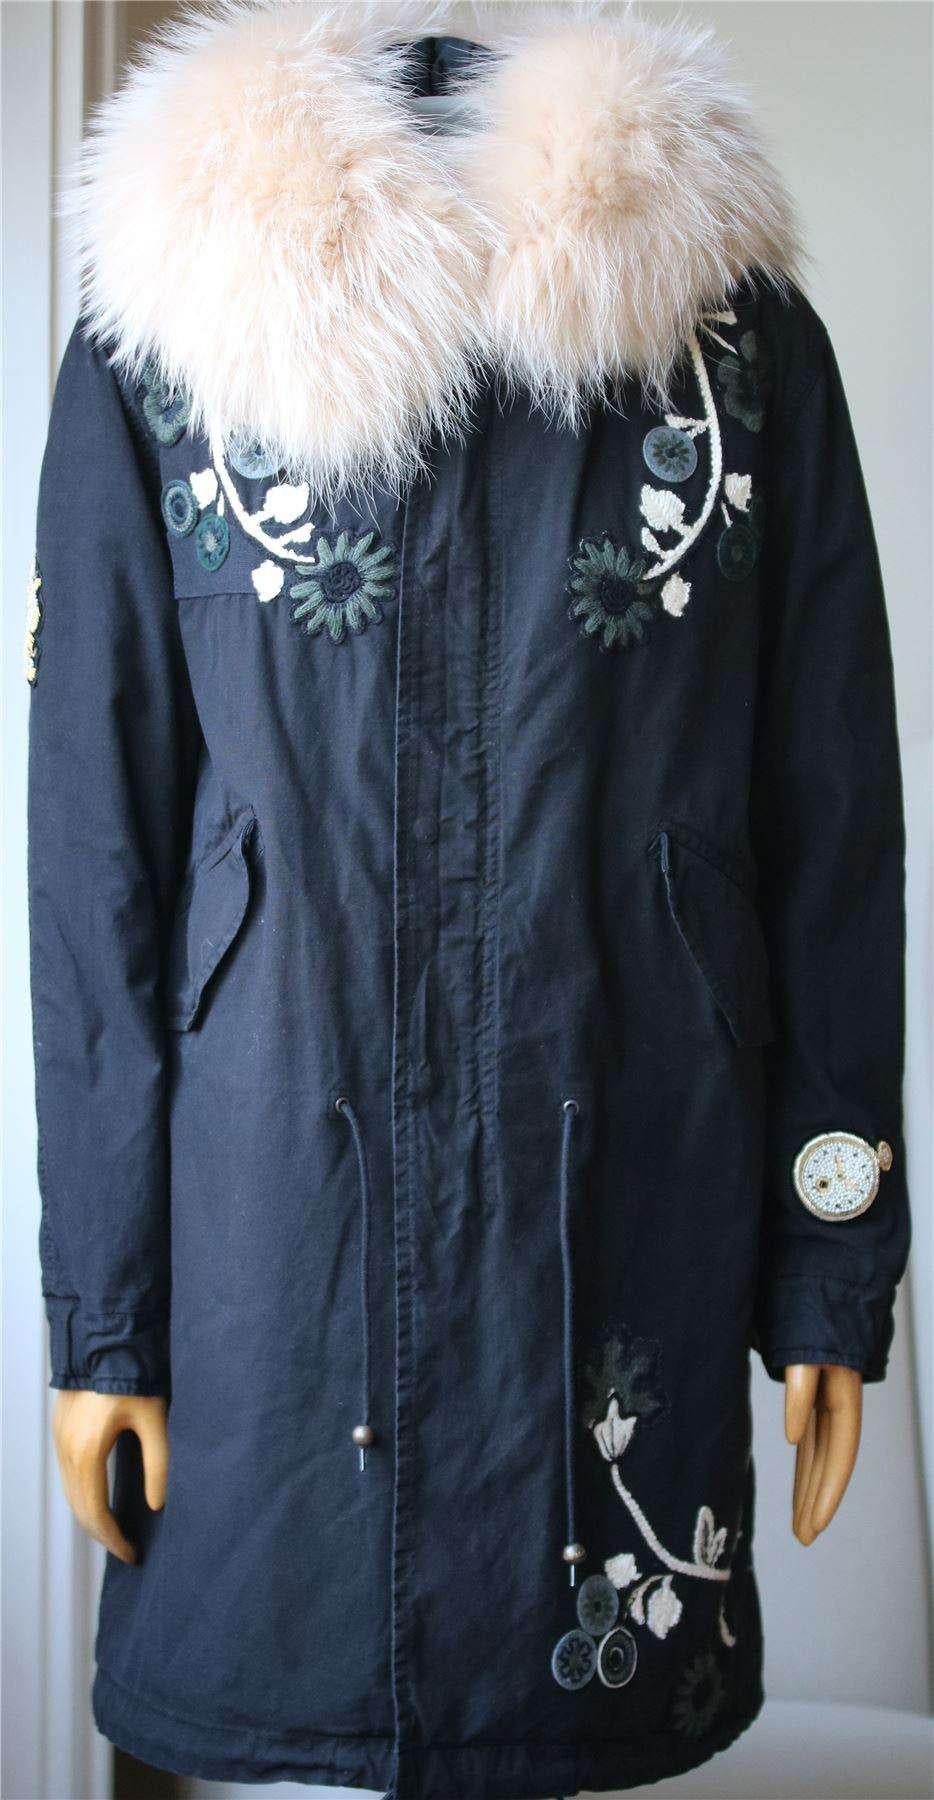 Black and egg cream cotton and racoon fur embroidered parka from Mr & Mrs Italy. 
100% Raccoon. 100% Cotton.

Size: XXSmall (UK 4, US 0, IT 36, FR 32) 

Condition: As new condition, no sign of wear.